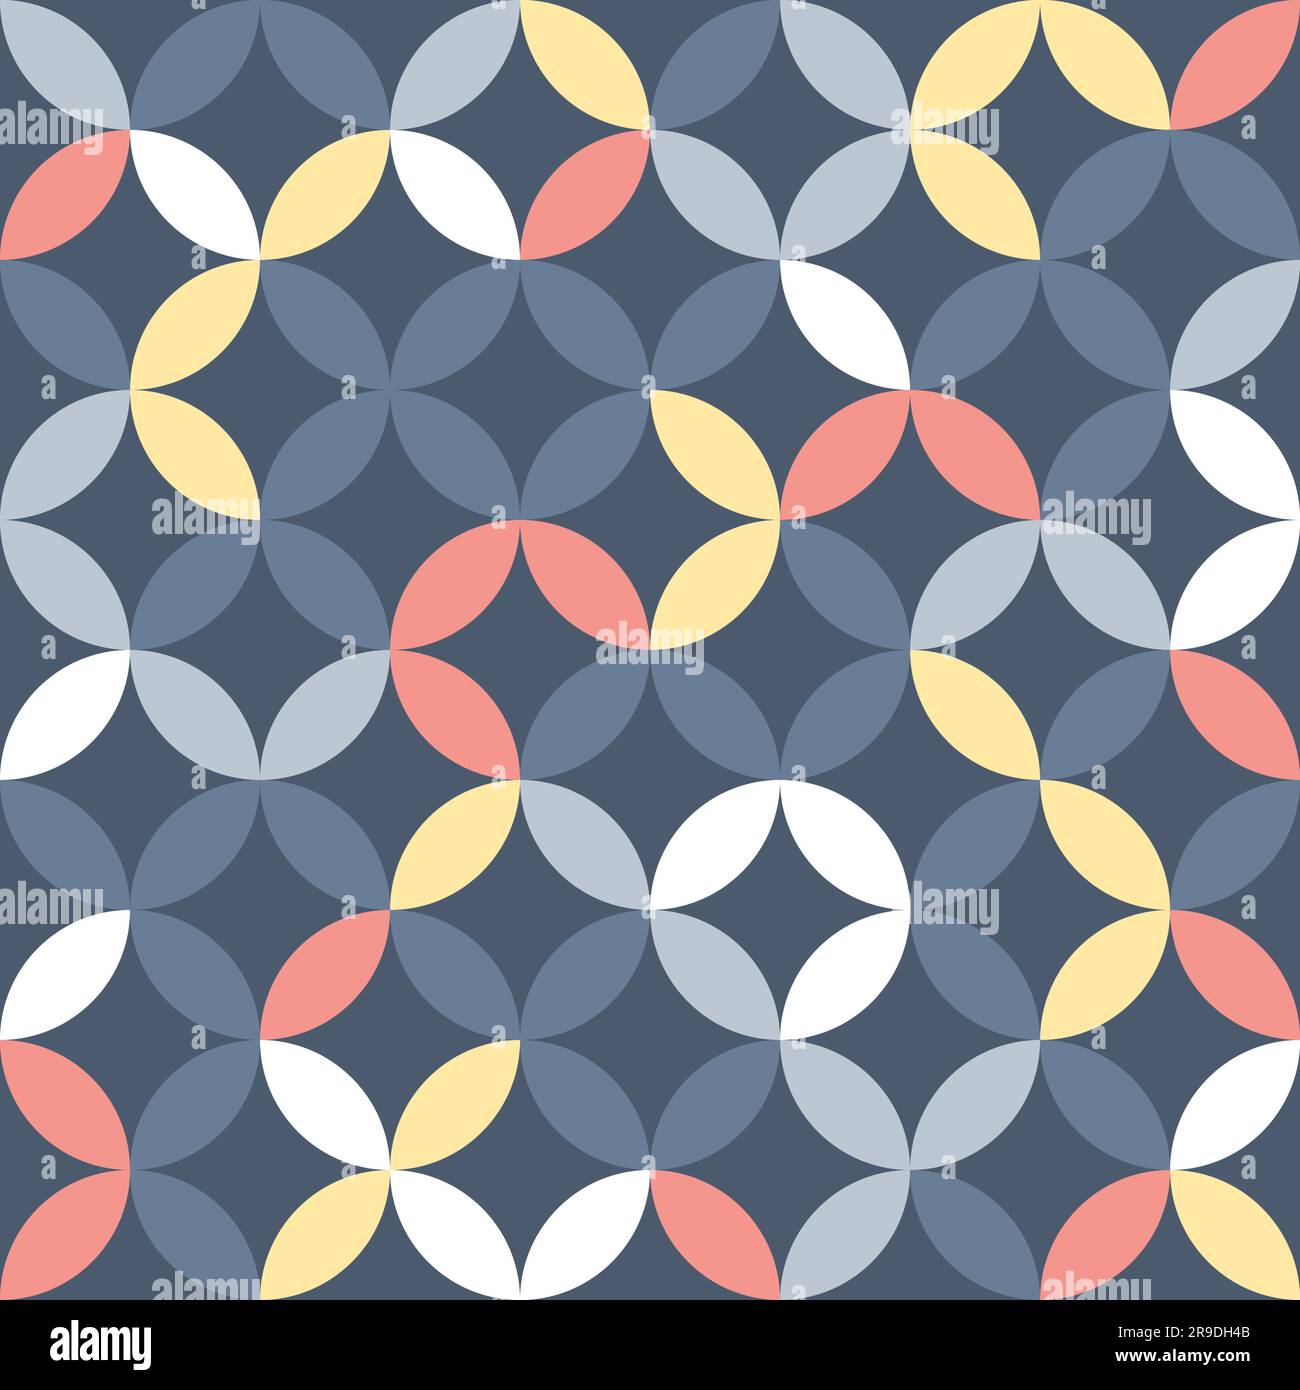 Cool overlapping circles seamless texture. Retro pastel ovals and circles vector geometric fashion pattern. Colorful fashion print. Stock Vector